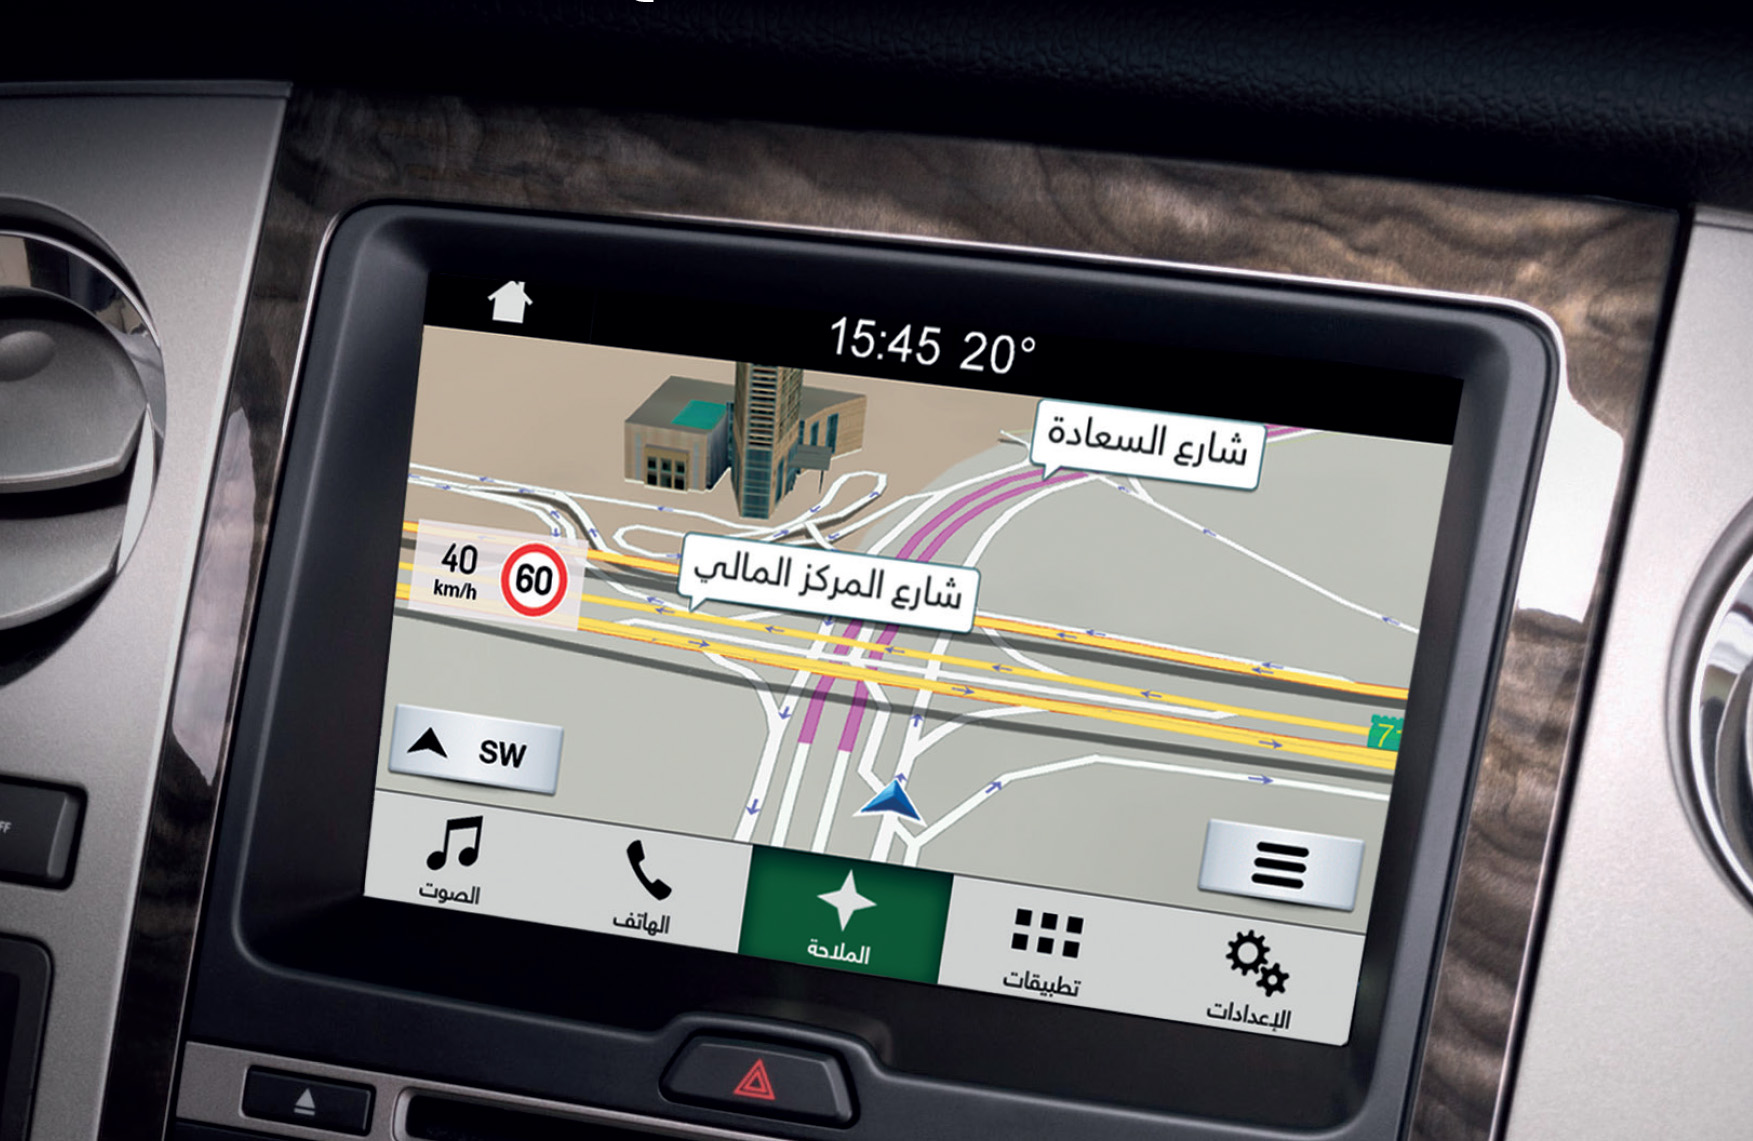 Ford Brings Intelligent SYNC3 Infotainment System to the Middle East